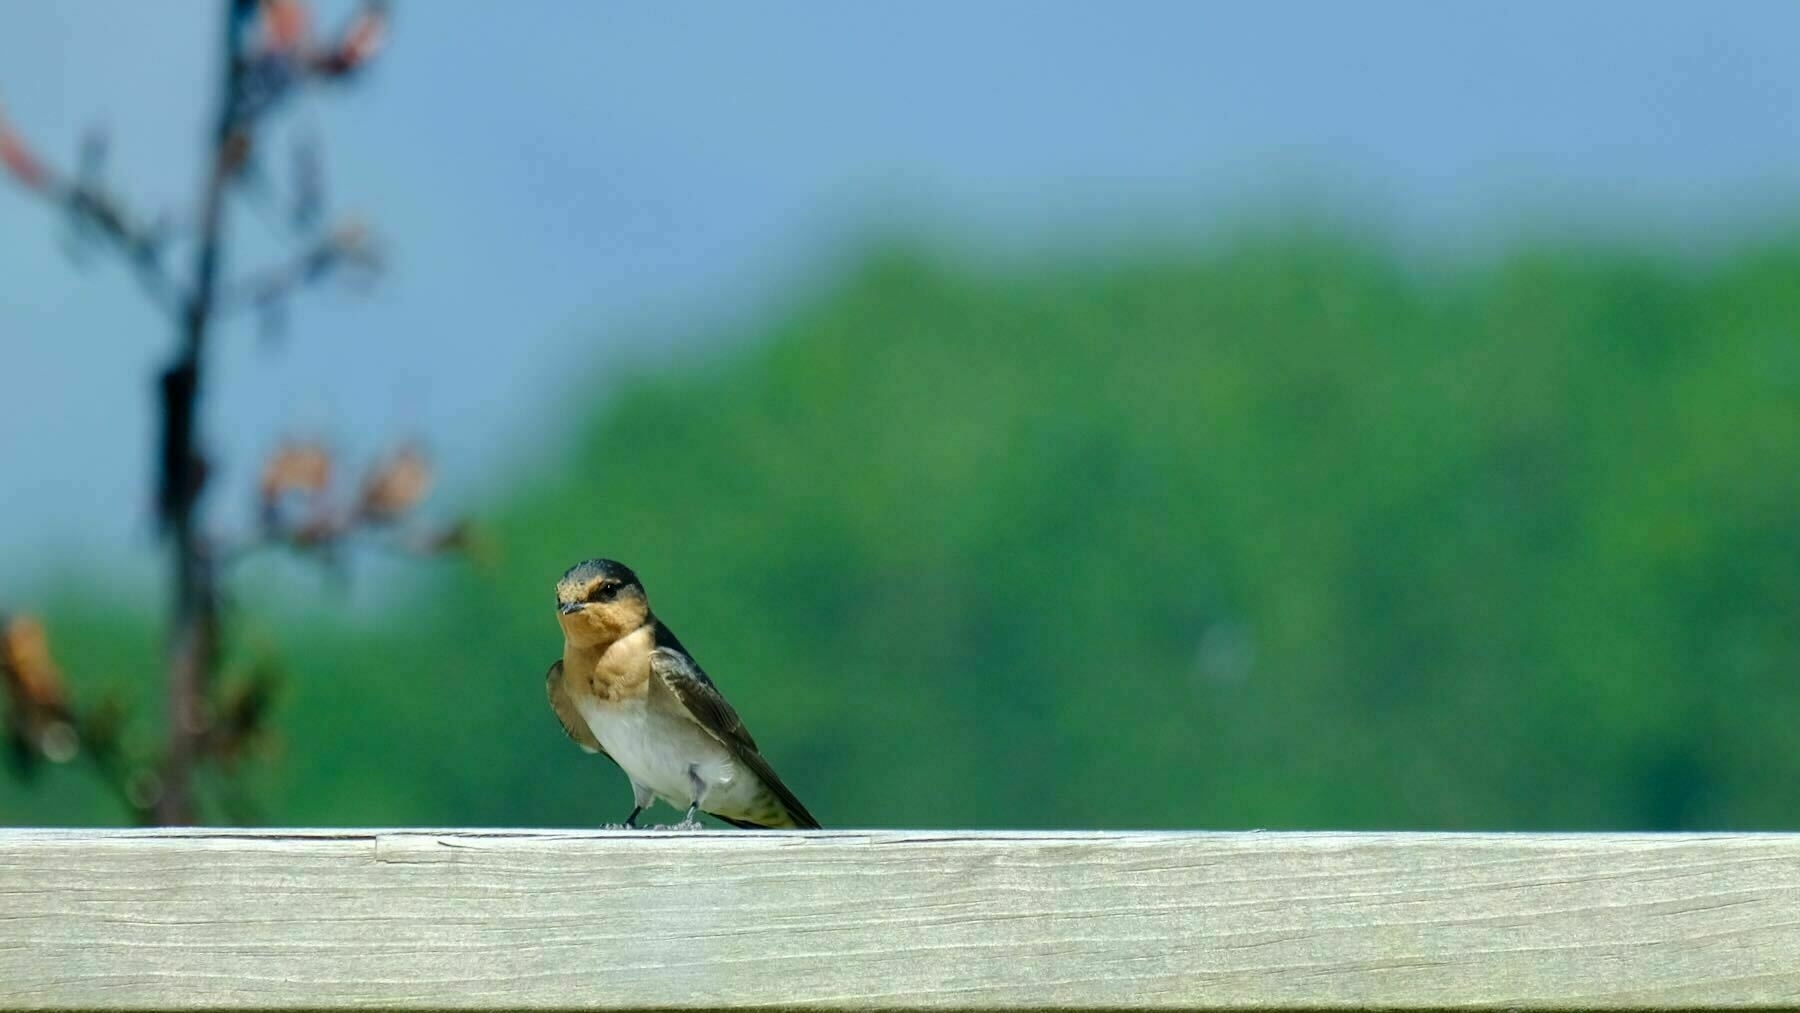 Swallow on the railing  3